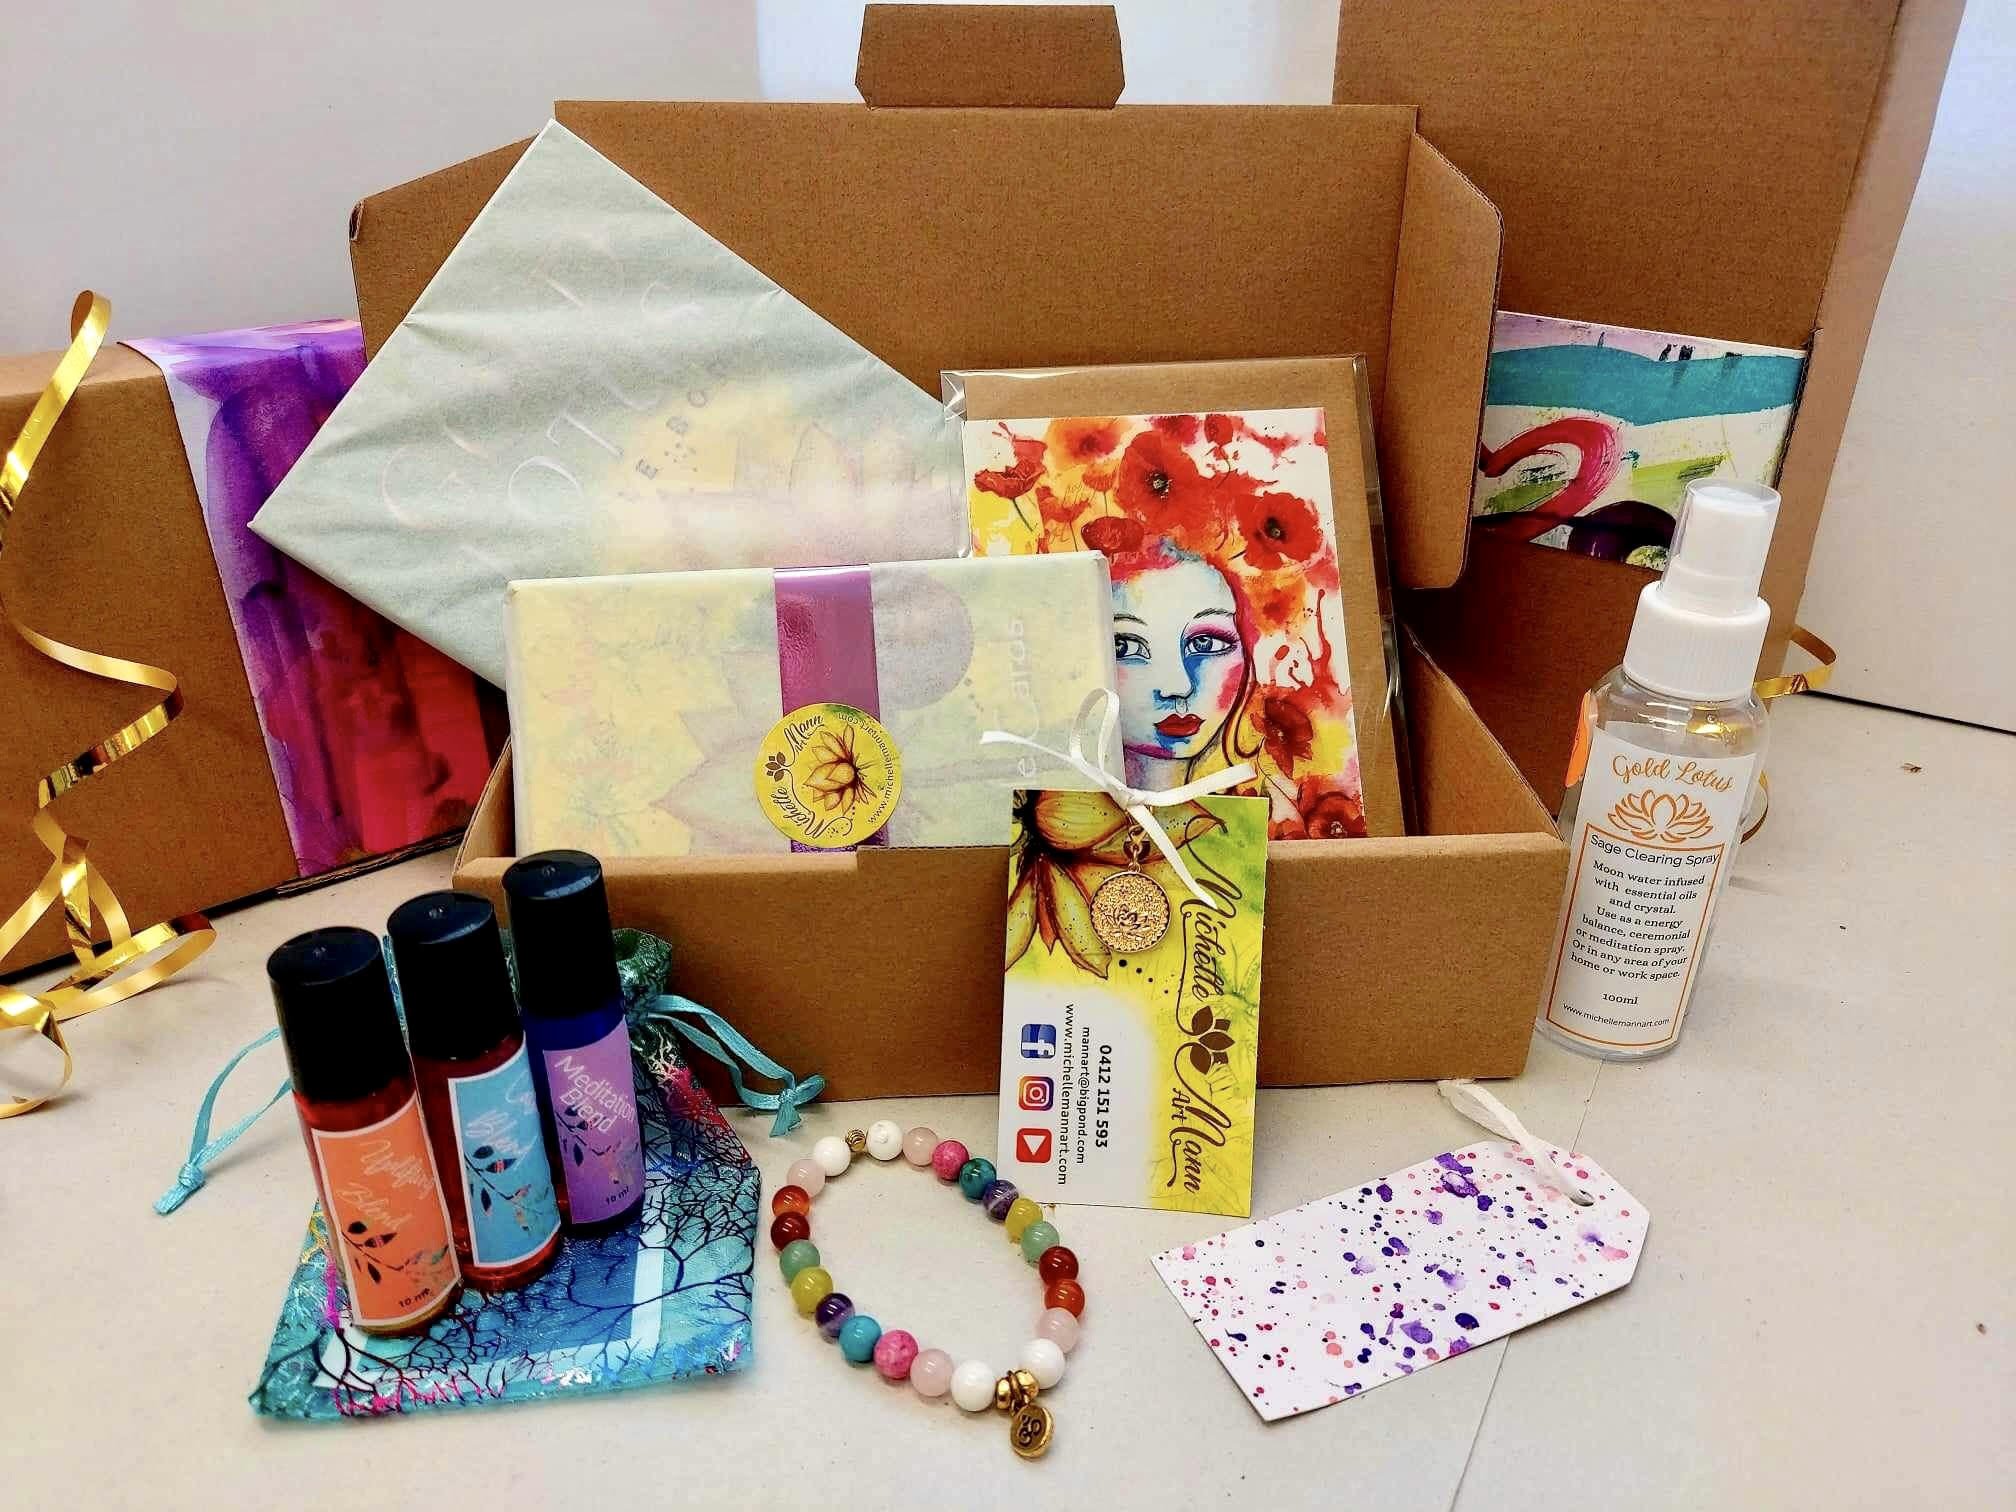 Gold Lotus Self Care gift pack